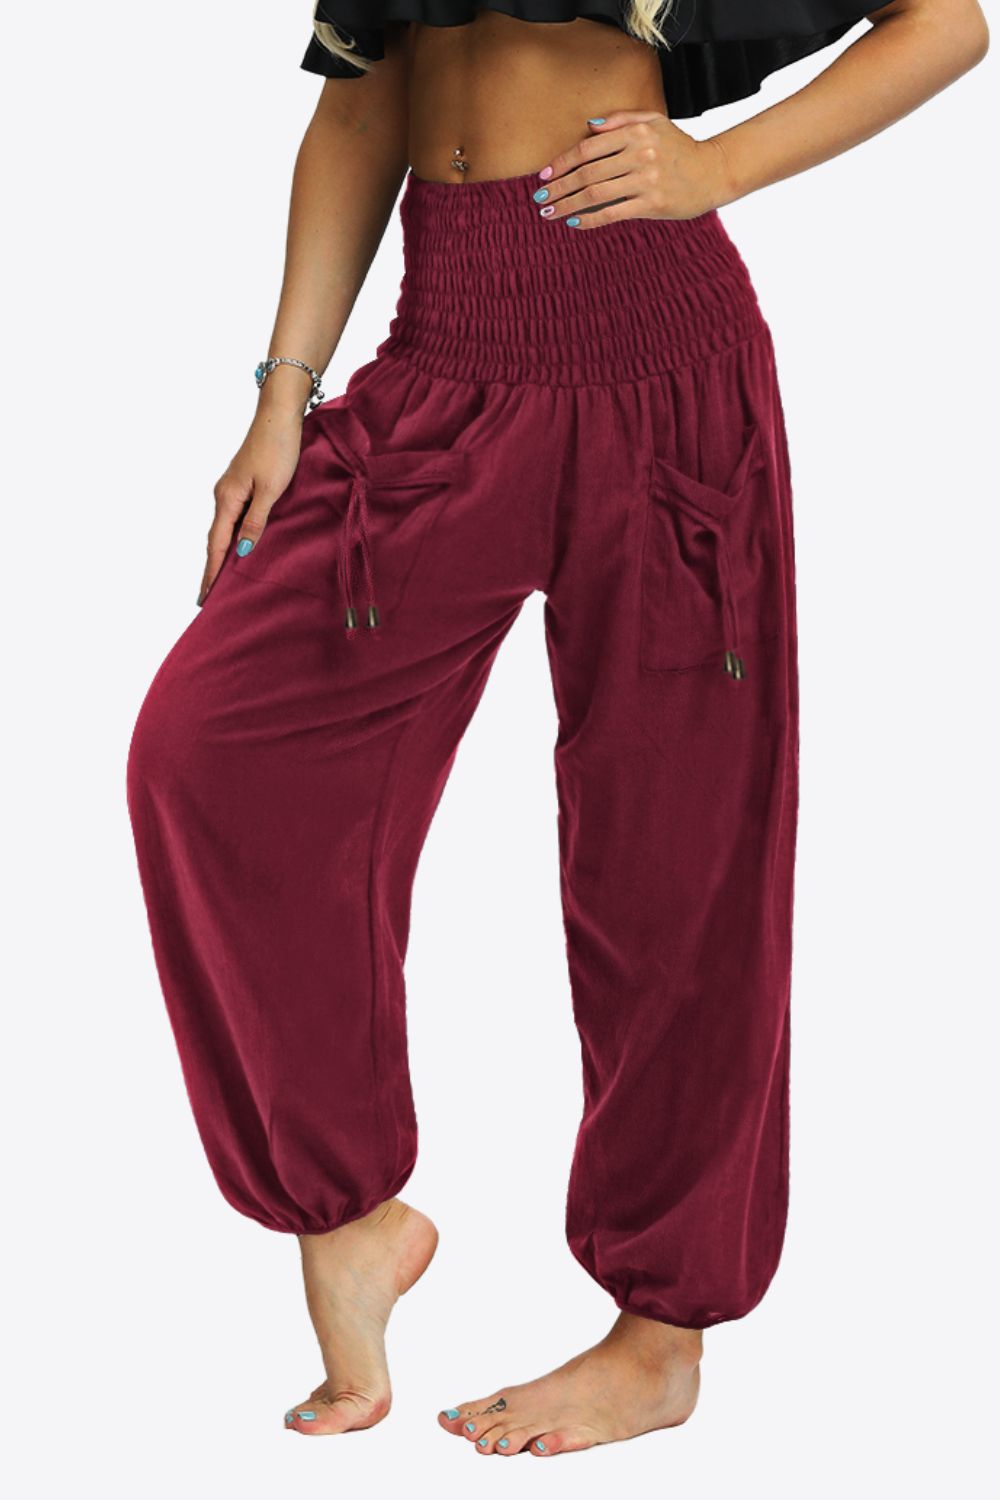 Smocked Long Joggers with Pockets - Dark Red / S - Bottoms - Pants - 7 - 2024